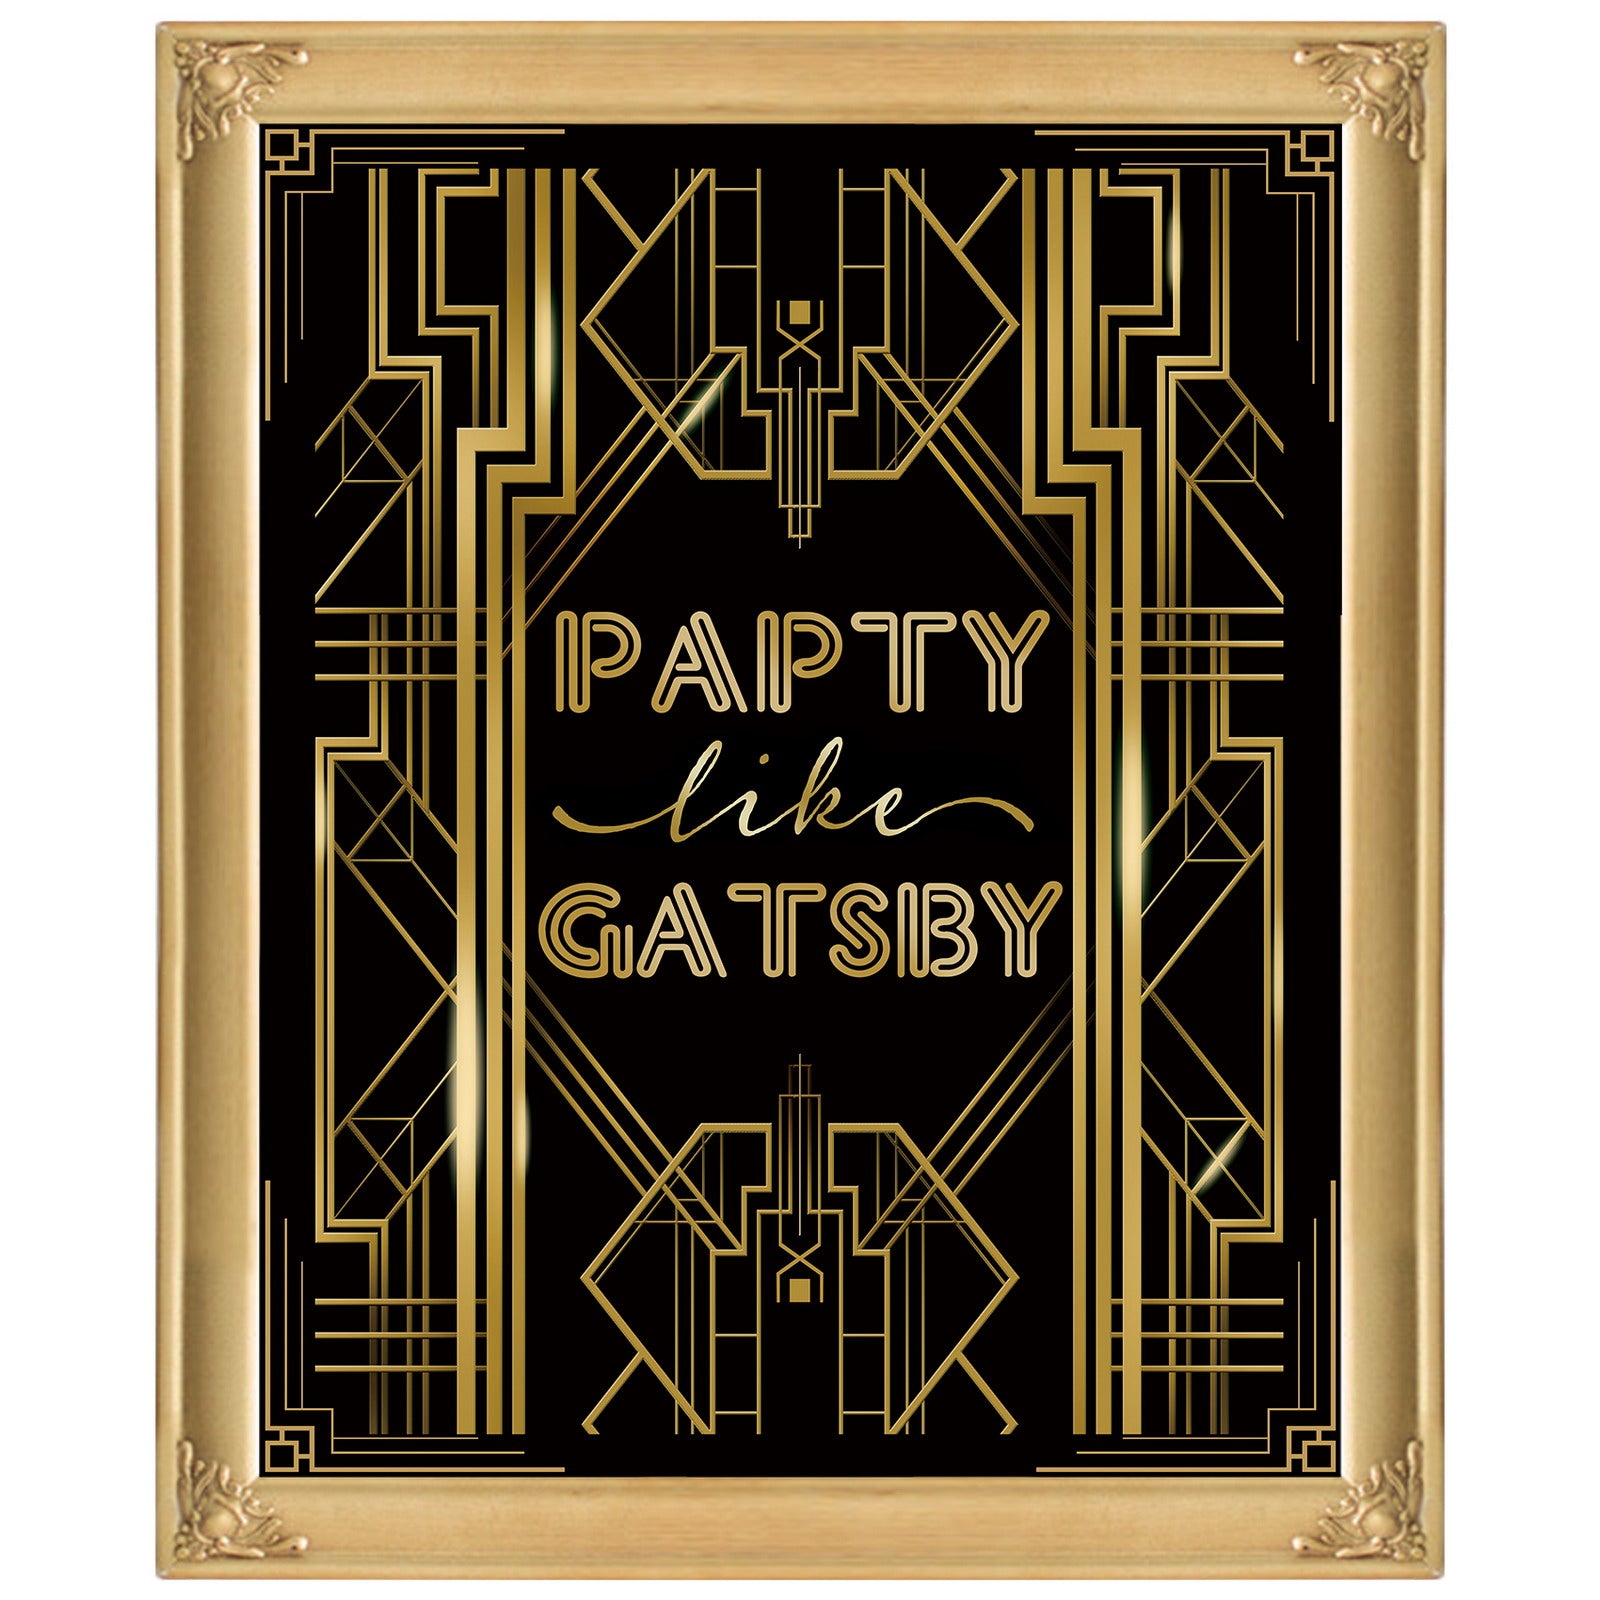 Roaring 20s Art Deco Poster Party Like Gatsby 16x12inch A3